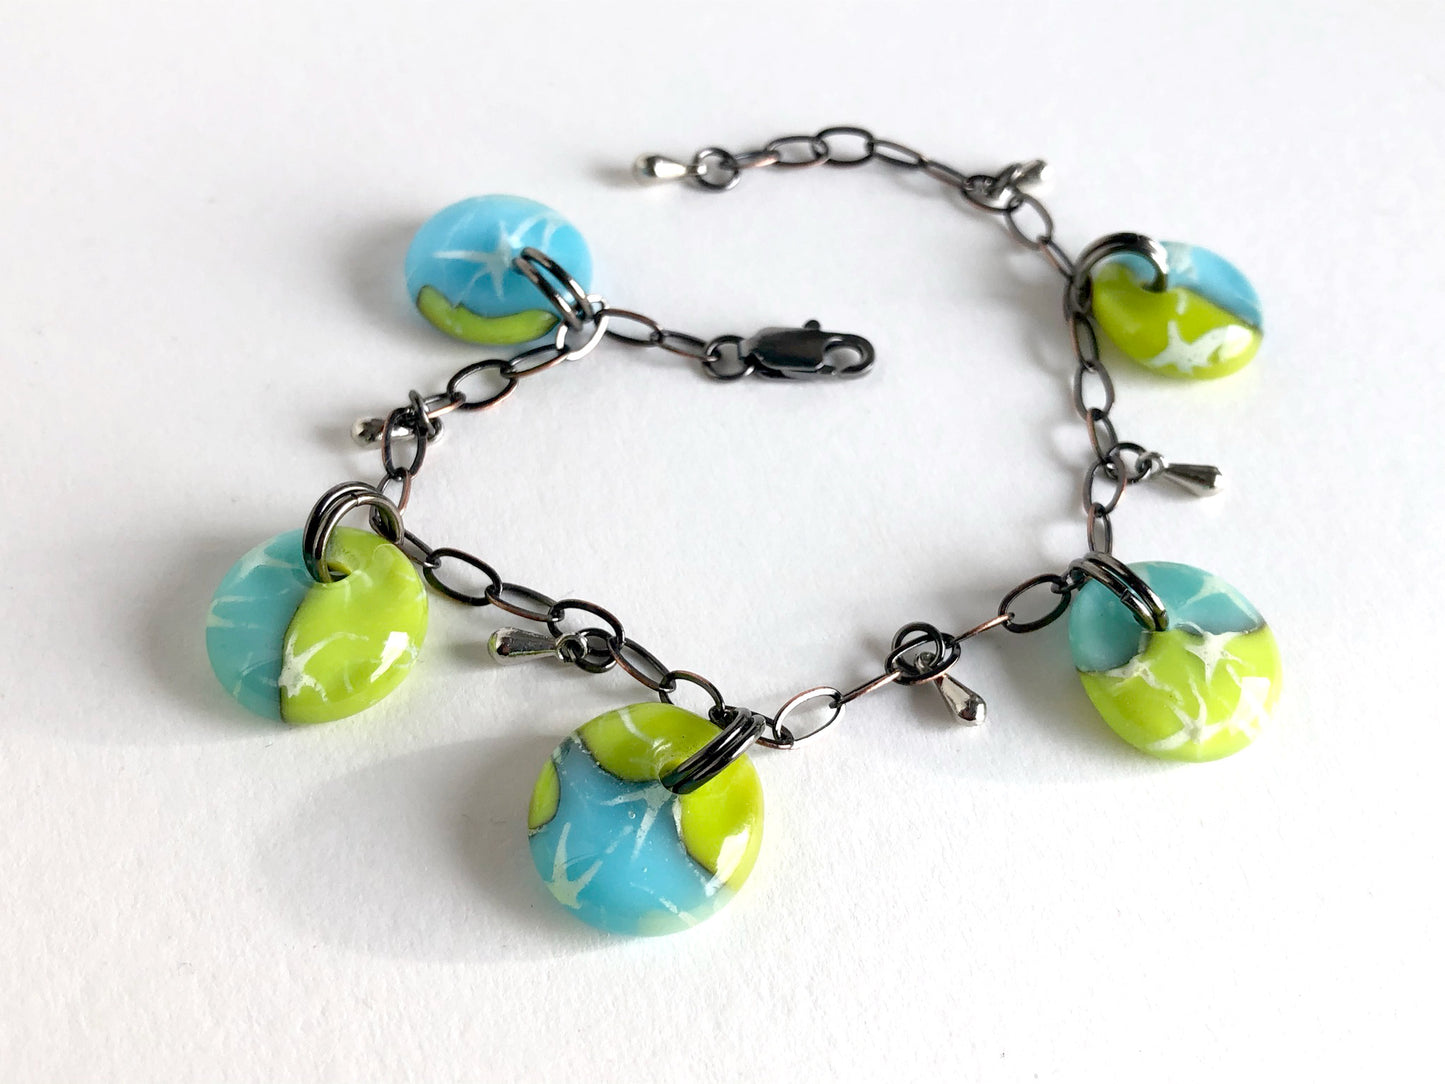 Glass drop bracelet in aqua blue and light olive green / chartreuse with painted silver stars